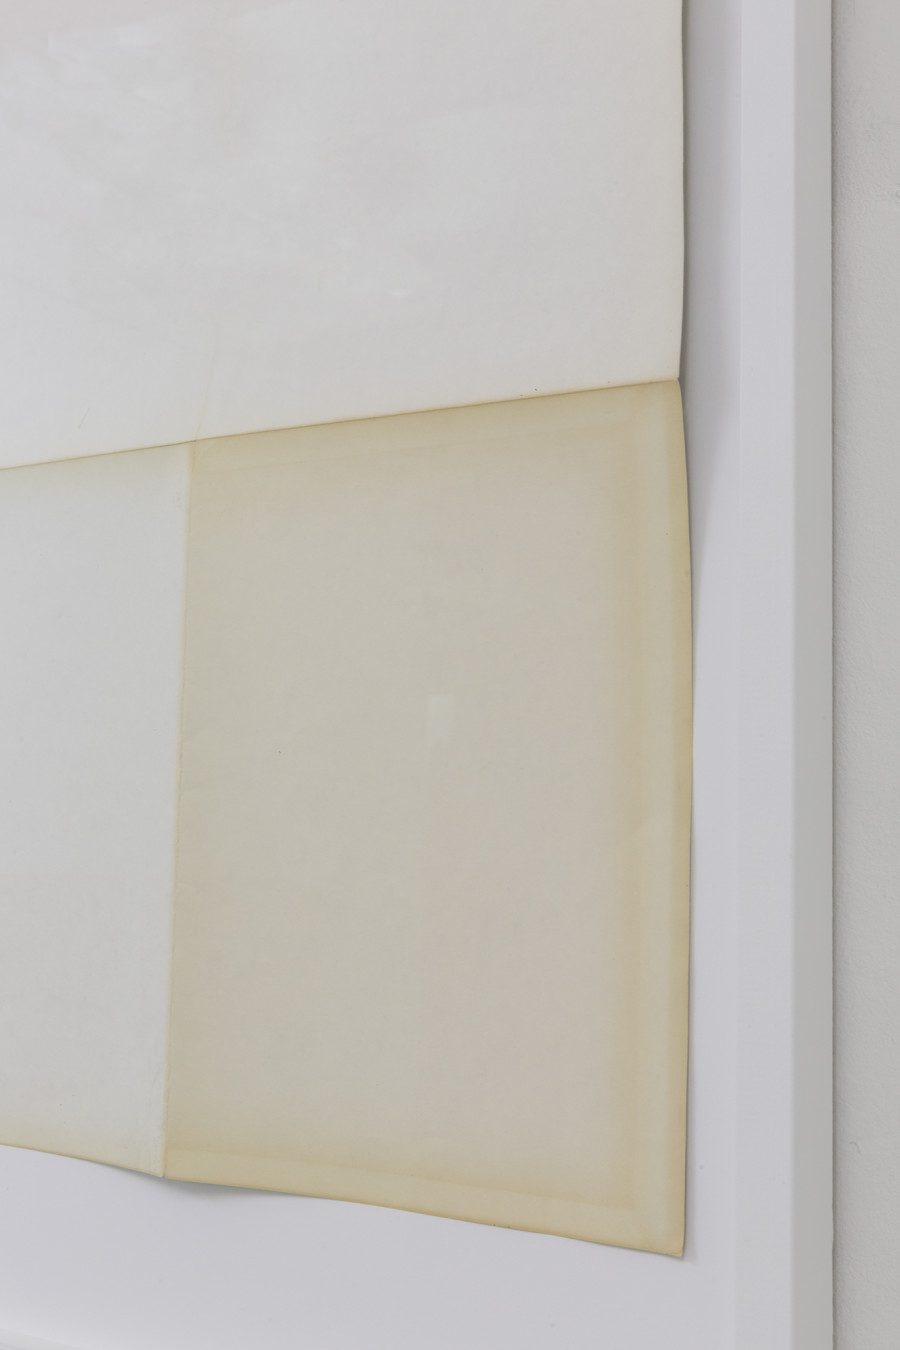 Théa Giglio, Untitled (A Thousand Words) II, 2023, detail, unfolded paper, white wooden frame, UV glass.